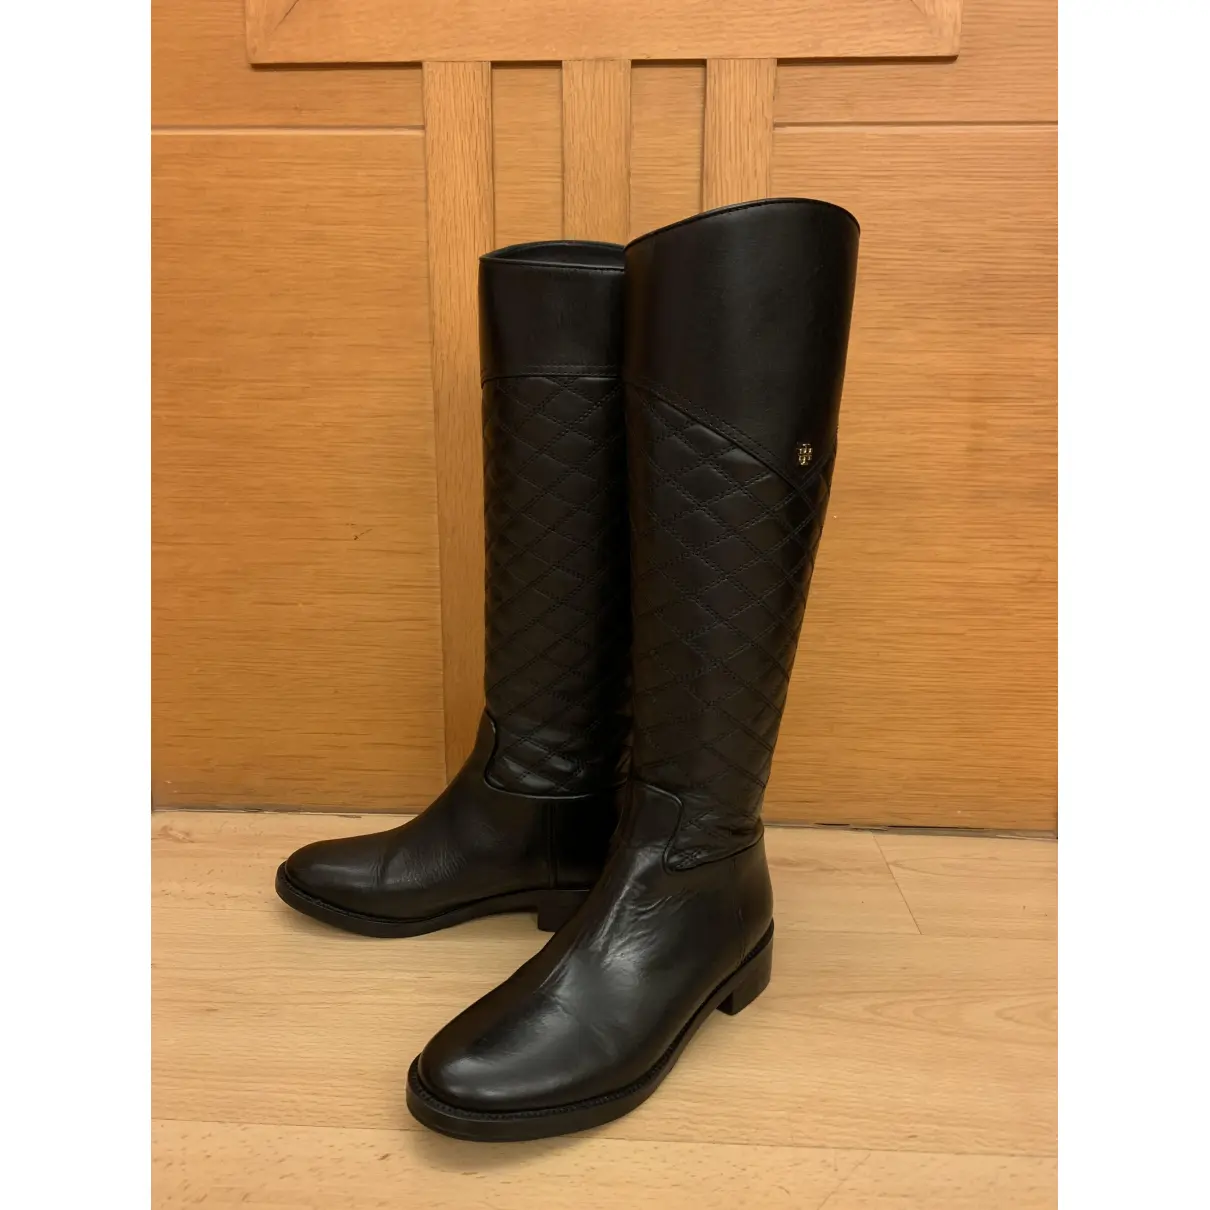 Buy Tory Burch Leather riding boots online